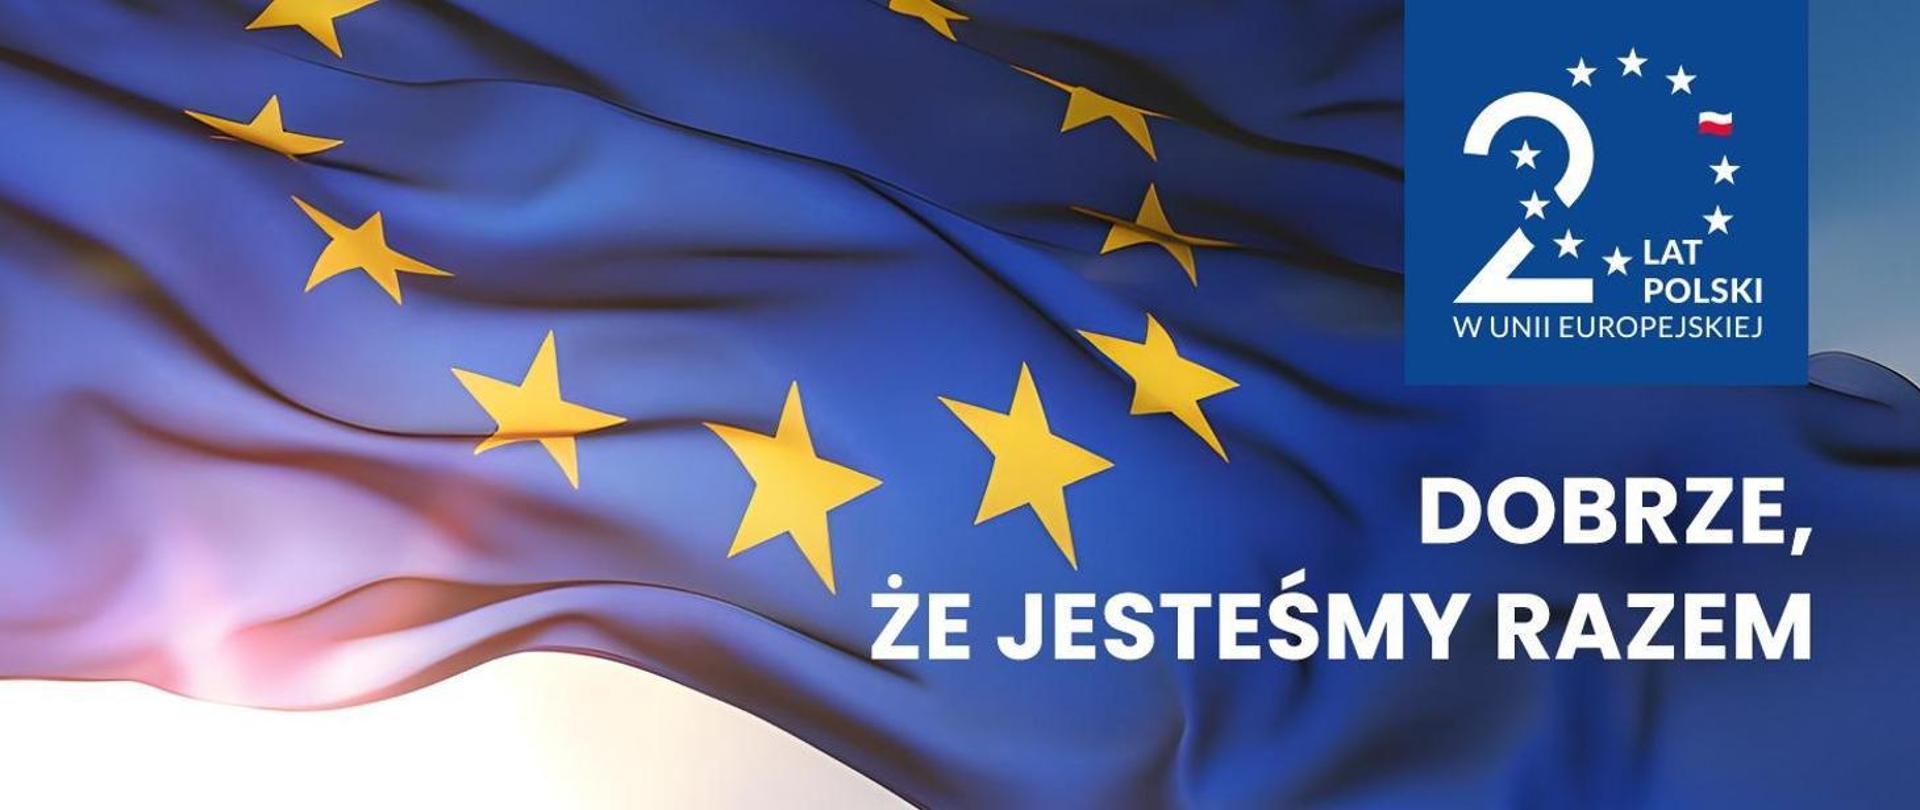 20 years of Poland in the European Union